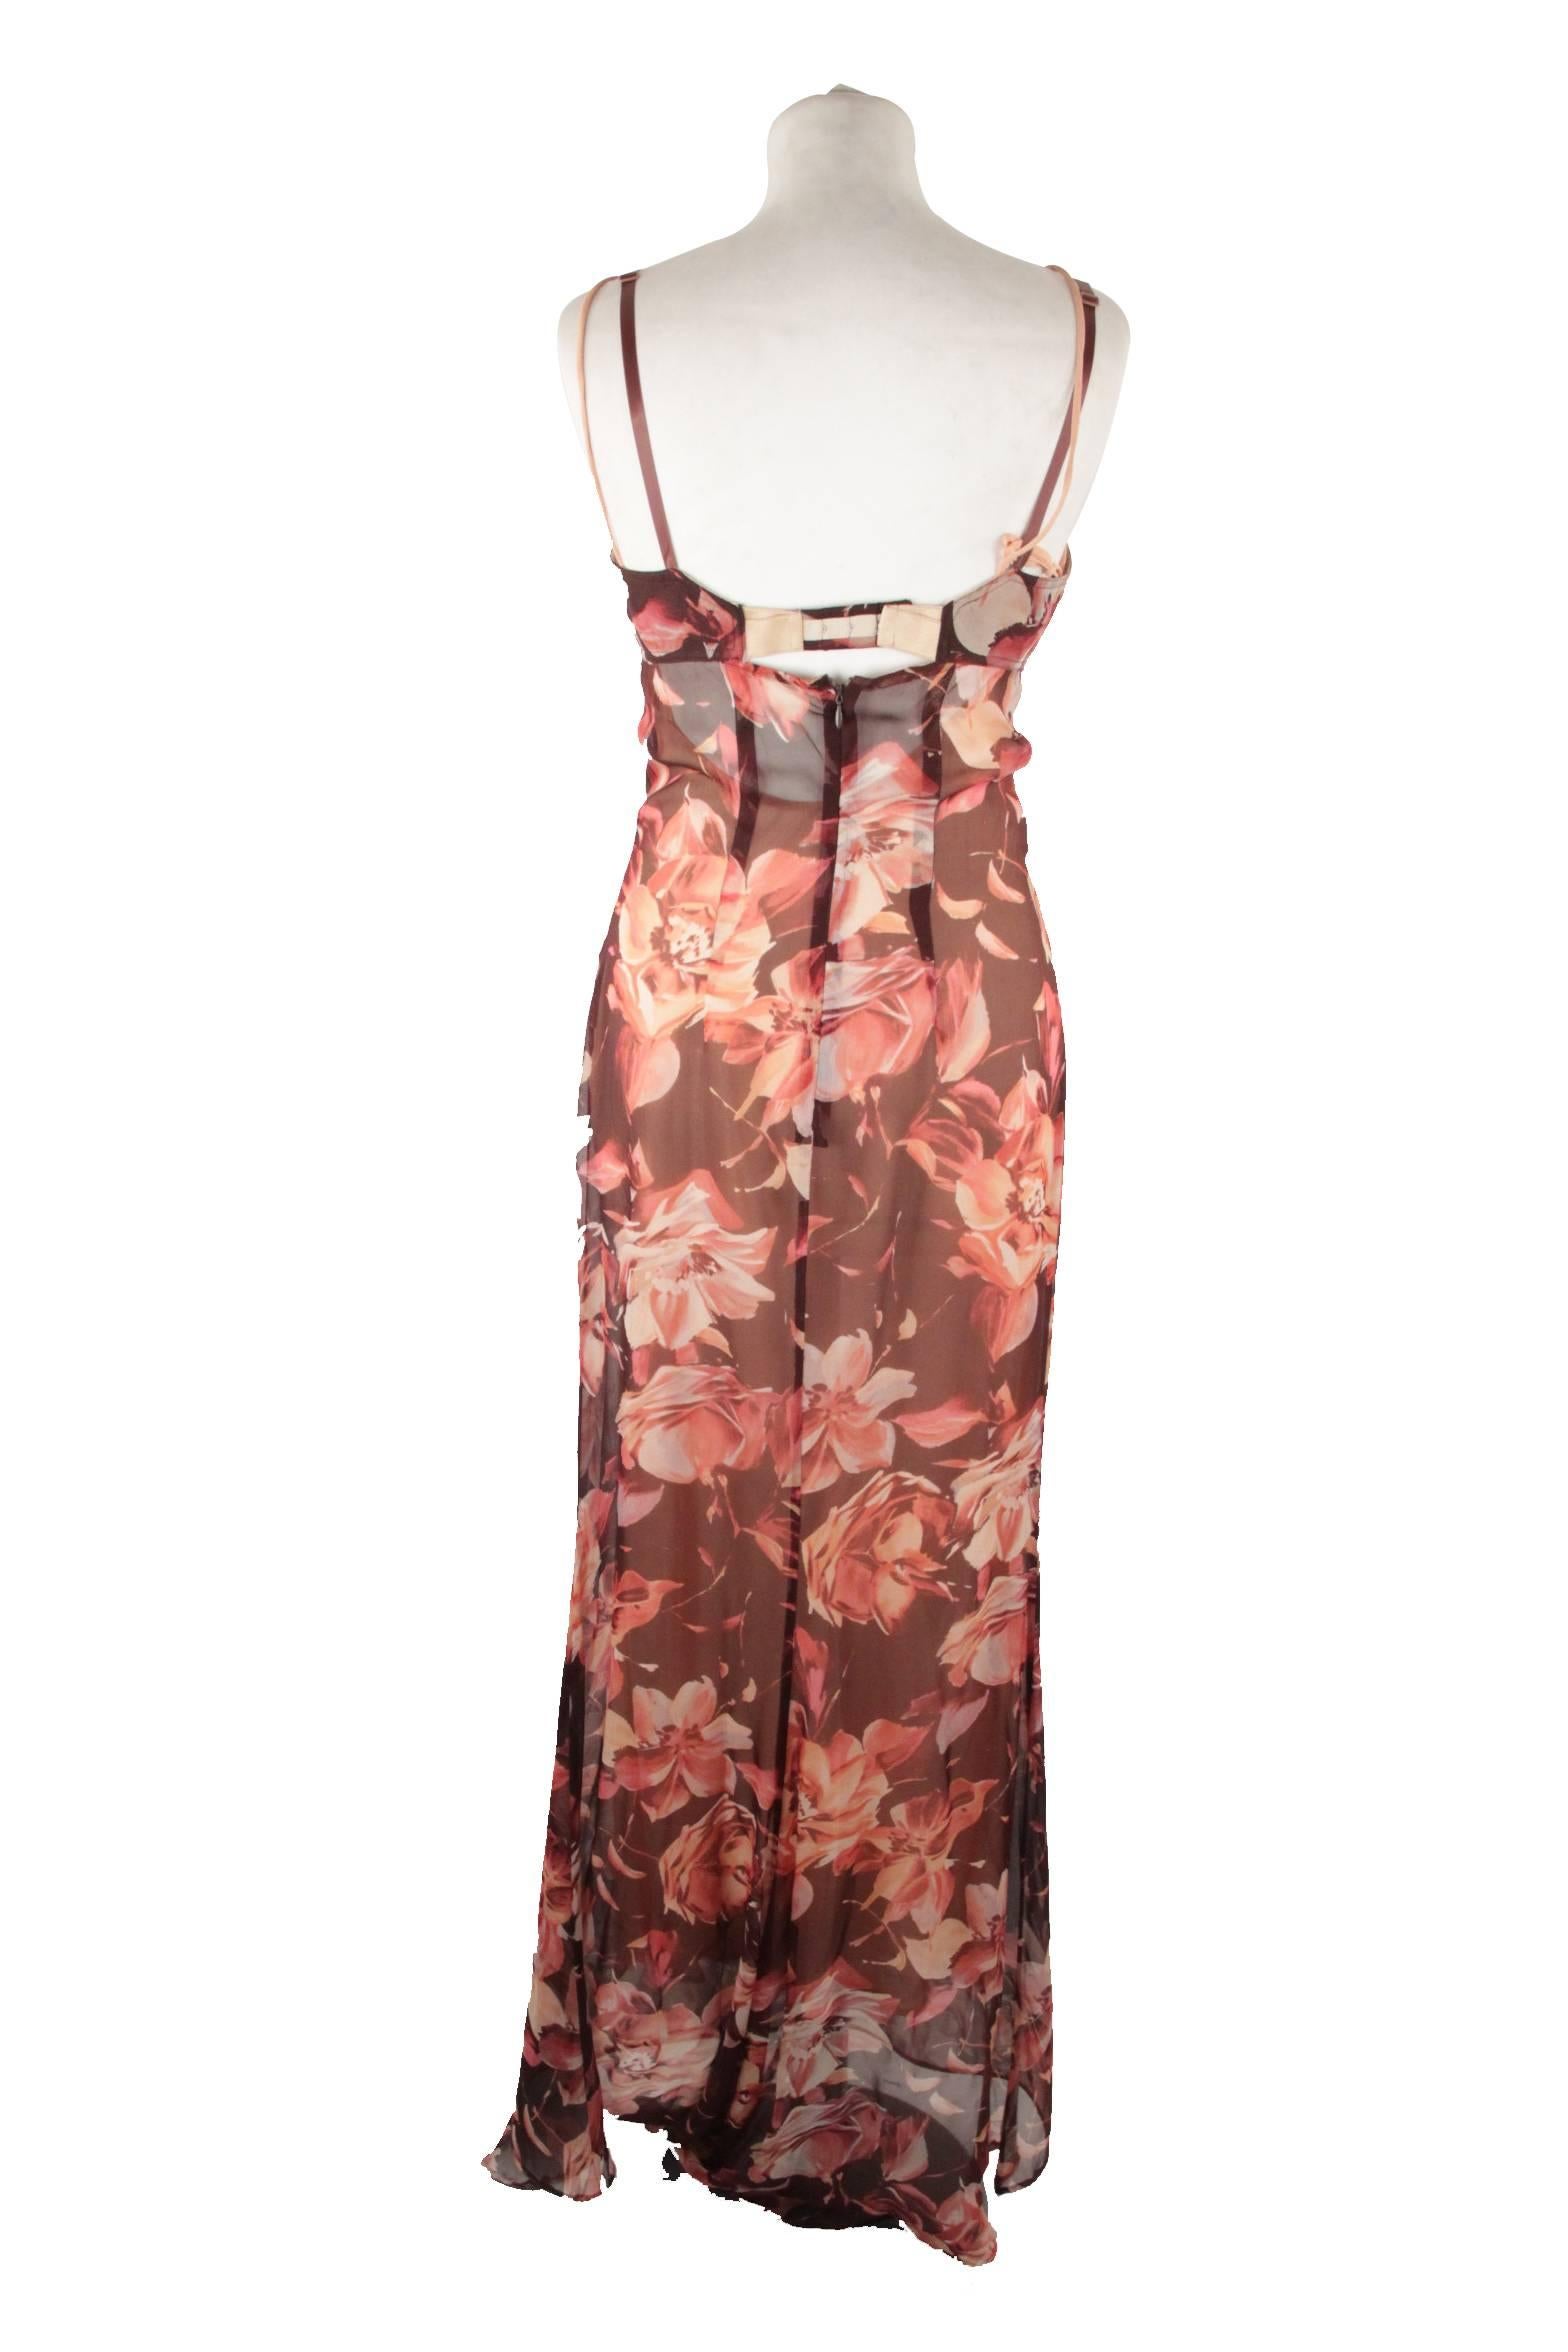 Women's DOLCE & GABBANA Silk Floral MAXI CAMI DRESS with Matching OVERCOAT Size 42